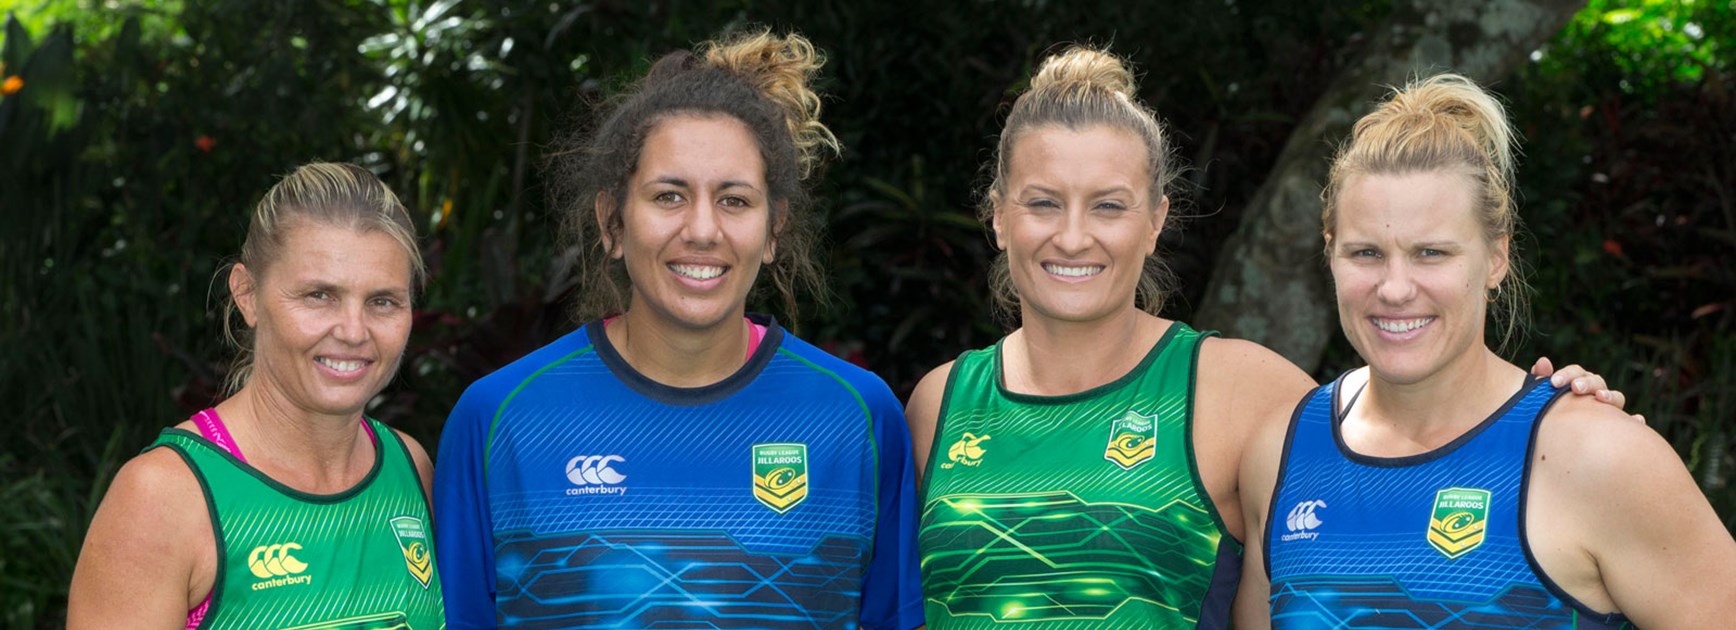 NRL One Community ambassadors Karyn Murphy, Tallisha Harden, Ruan Sims and Renae Kunst are sharing the rugby league message.